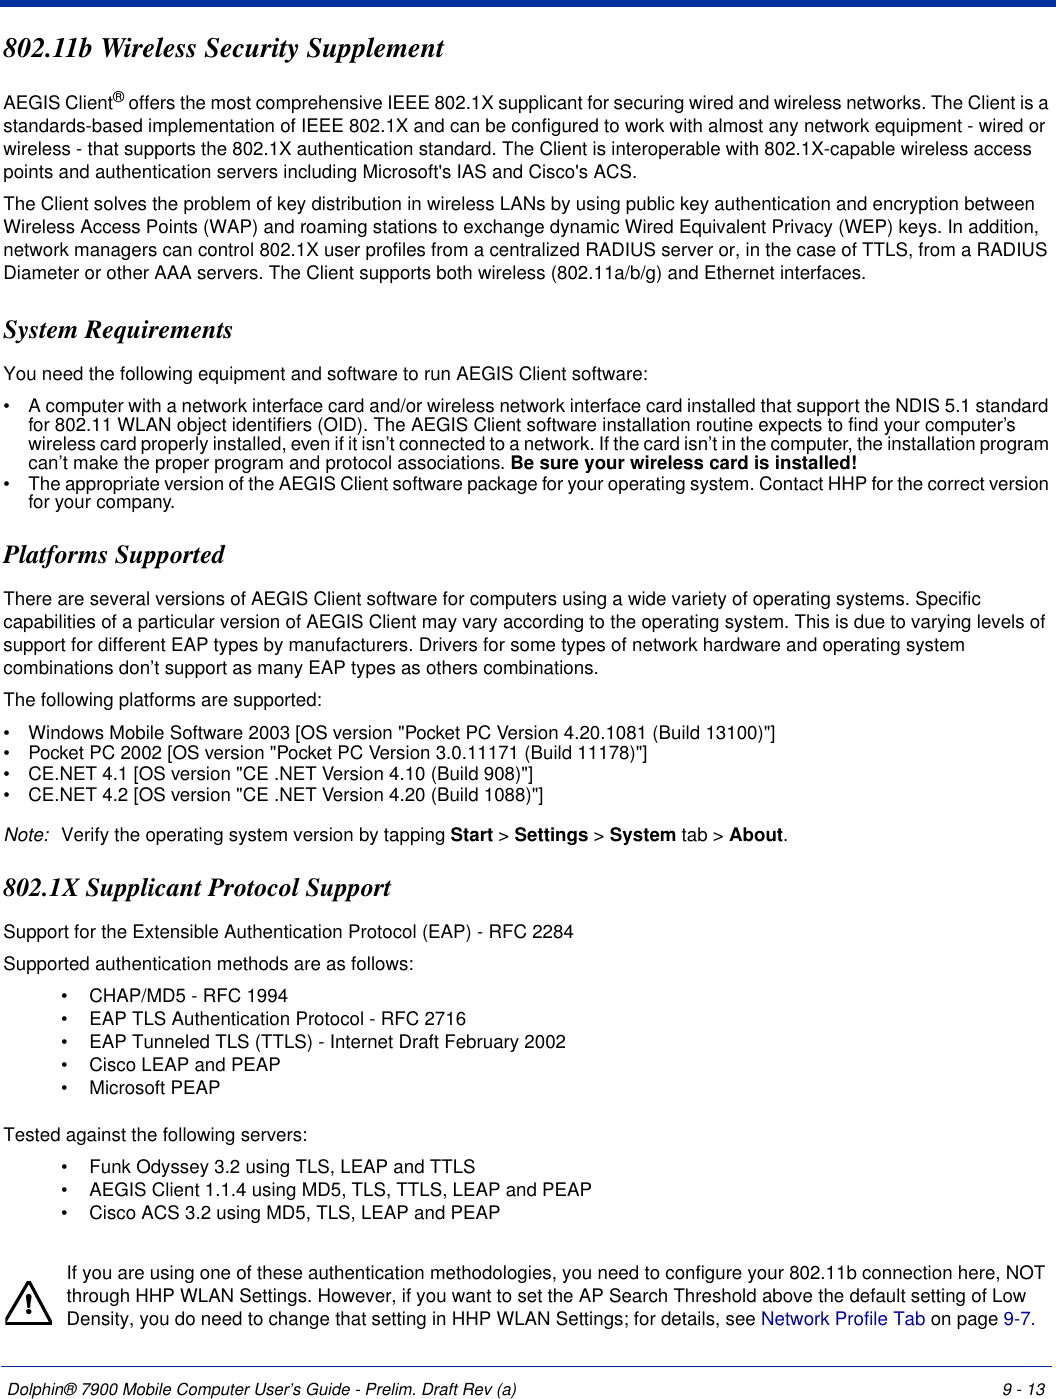 Dolphin® 7900 Mobile Computer User’s Guide - Prelim. Draft Rev (a) 9 - 13802.11b Wireless Security SupplementAEGIS Client® offers the most comprehensive IEEE 802.1X supplicant for securing wired and wireless networks. The Client is a standards-based implementation of IEEE 802.1X and can be configured to work with almost any network equipment - wired or wireless - that supports the 802.1X authentication standard. The Client is interoperable with 802.1X-capable wireless access points and authentication servers including Microsoft&apos;s IAS and Cisco&apos;s ACS.The Client solves the problem of key distribution in wireless LANs by using public key authentication and encryption between Wireless Access Points (WAP) and roaming stations to exchange dynamic Wired Equivalent Privacy (WEP) keys. In addition, network managers can control 802.1X user profiles from a centralized RADIUS server or, in the case of TTLS, from a RADIUS Diameter or other AAA servers. The Client supports both wireless (802.11a/b/g) and Ethernet interfaces. System RequirementsYou need the following equipment and software to run AEGIS Client software:•           A computer with a network interface card and/or wireless network interface card installed that support the NDIS 5.1 standard for 802.11 WLAN object identifiers (OID). The AEGIS Client software installation routine expects to find your computer’s wireless card properly installed, even if it isn’t connected to a network. If the card isn’t in the computer, the installation program can’t make the proper program and protocol associations. Be sure your wireless card is installed!•           The appropriate version of the AEGIS Client software package for your operating system. Contact HHP for the correct version for your company.Platforms SupportedThere are several versions of AEGIS Client software for computers using a wide variety of operating systems. Specific capabilities of a particular version of AEGIS Client may vary according to the operating system. This is due to varying levels of support for different EAP types by manufacturers. Drivers for some types of network hardware and operating system combinations don’t support as many EAP types as others combinations.The following platforms are supported:•           Windows Mobile Software 2003 [OS version &quot;Pocket PC Version 4.20.1081 (Build 13100)&quot;]•           Pocket PC 2002 [OS version &quot;Pocket PC Version 3.0.11171 (Build 11178)&quot;]•           CE.NET 4.1 [OS version &quot;CE .NET Version 4.10 (Build 908)&quot;]•           CE.NET 4.2 [OS version &quot;CE .NET Version 4.20 (Build 1088)&quot;] Note: Verify the operating system version by tapping Start &gt; Settings &gt; System tab &gt; About. 802.1X Supplicant Protocol Support Support for the Extensible Authentication Protocol (EAP) - RFC 2284Supported authentication methods are as follows: •             CHAP/MD5 - RFC 1994 •             EAP TLS Authentication Protocol - RFC 2716 •             EAP Tunneled TLS (TTLS) - Internet Draft February 2002 •             Cisco LEAP and PEAP•             Microsoft PEAP  Tested against the following servers:•             Funk Odyssey 3.2 using TLS, LEAP and TTLS •             AEGIS Client 1.1.4 using MD5, TLS, TTLS, LEAP and PEAP •             Cisco ACS 3.2 using MD5, TLS, LEAP and PEAP If you are using one of these authentication methodologies, you need to configure your 802.11b connection here, NOT through HHP WLAN Settings. However, if you want to set the AP Search Threshold above the default setting of Low Density, you do need to change that setting in HHP WLAN Settings; for details, see Network Profile Tab on page 9-7.!